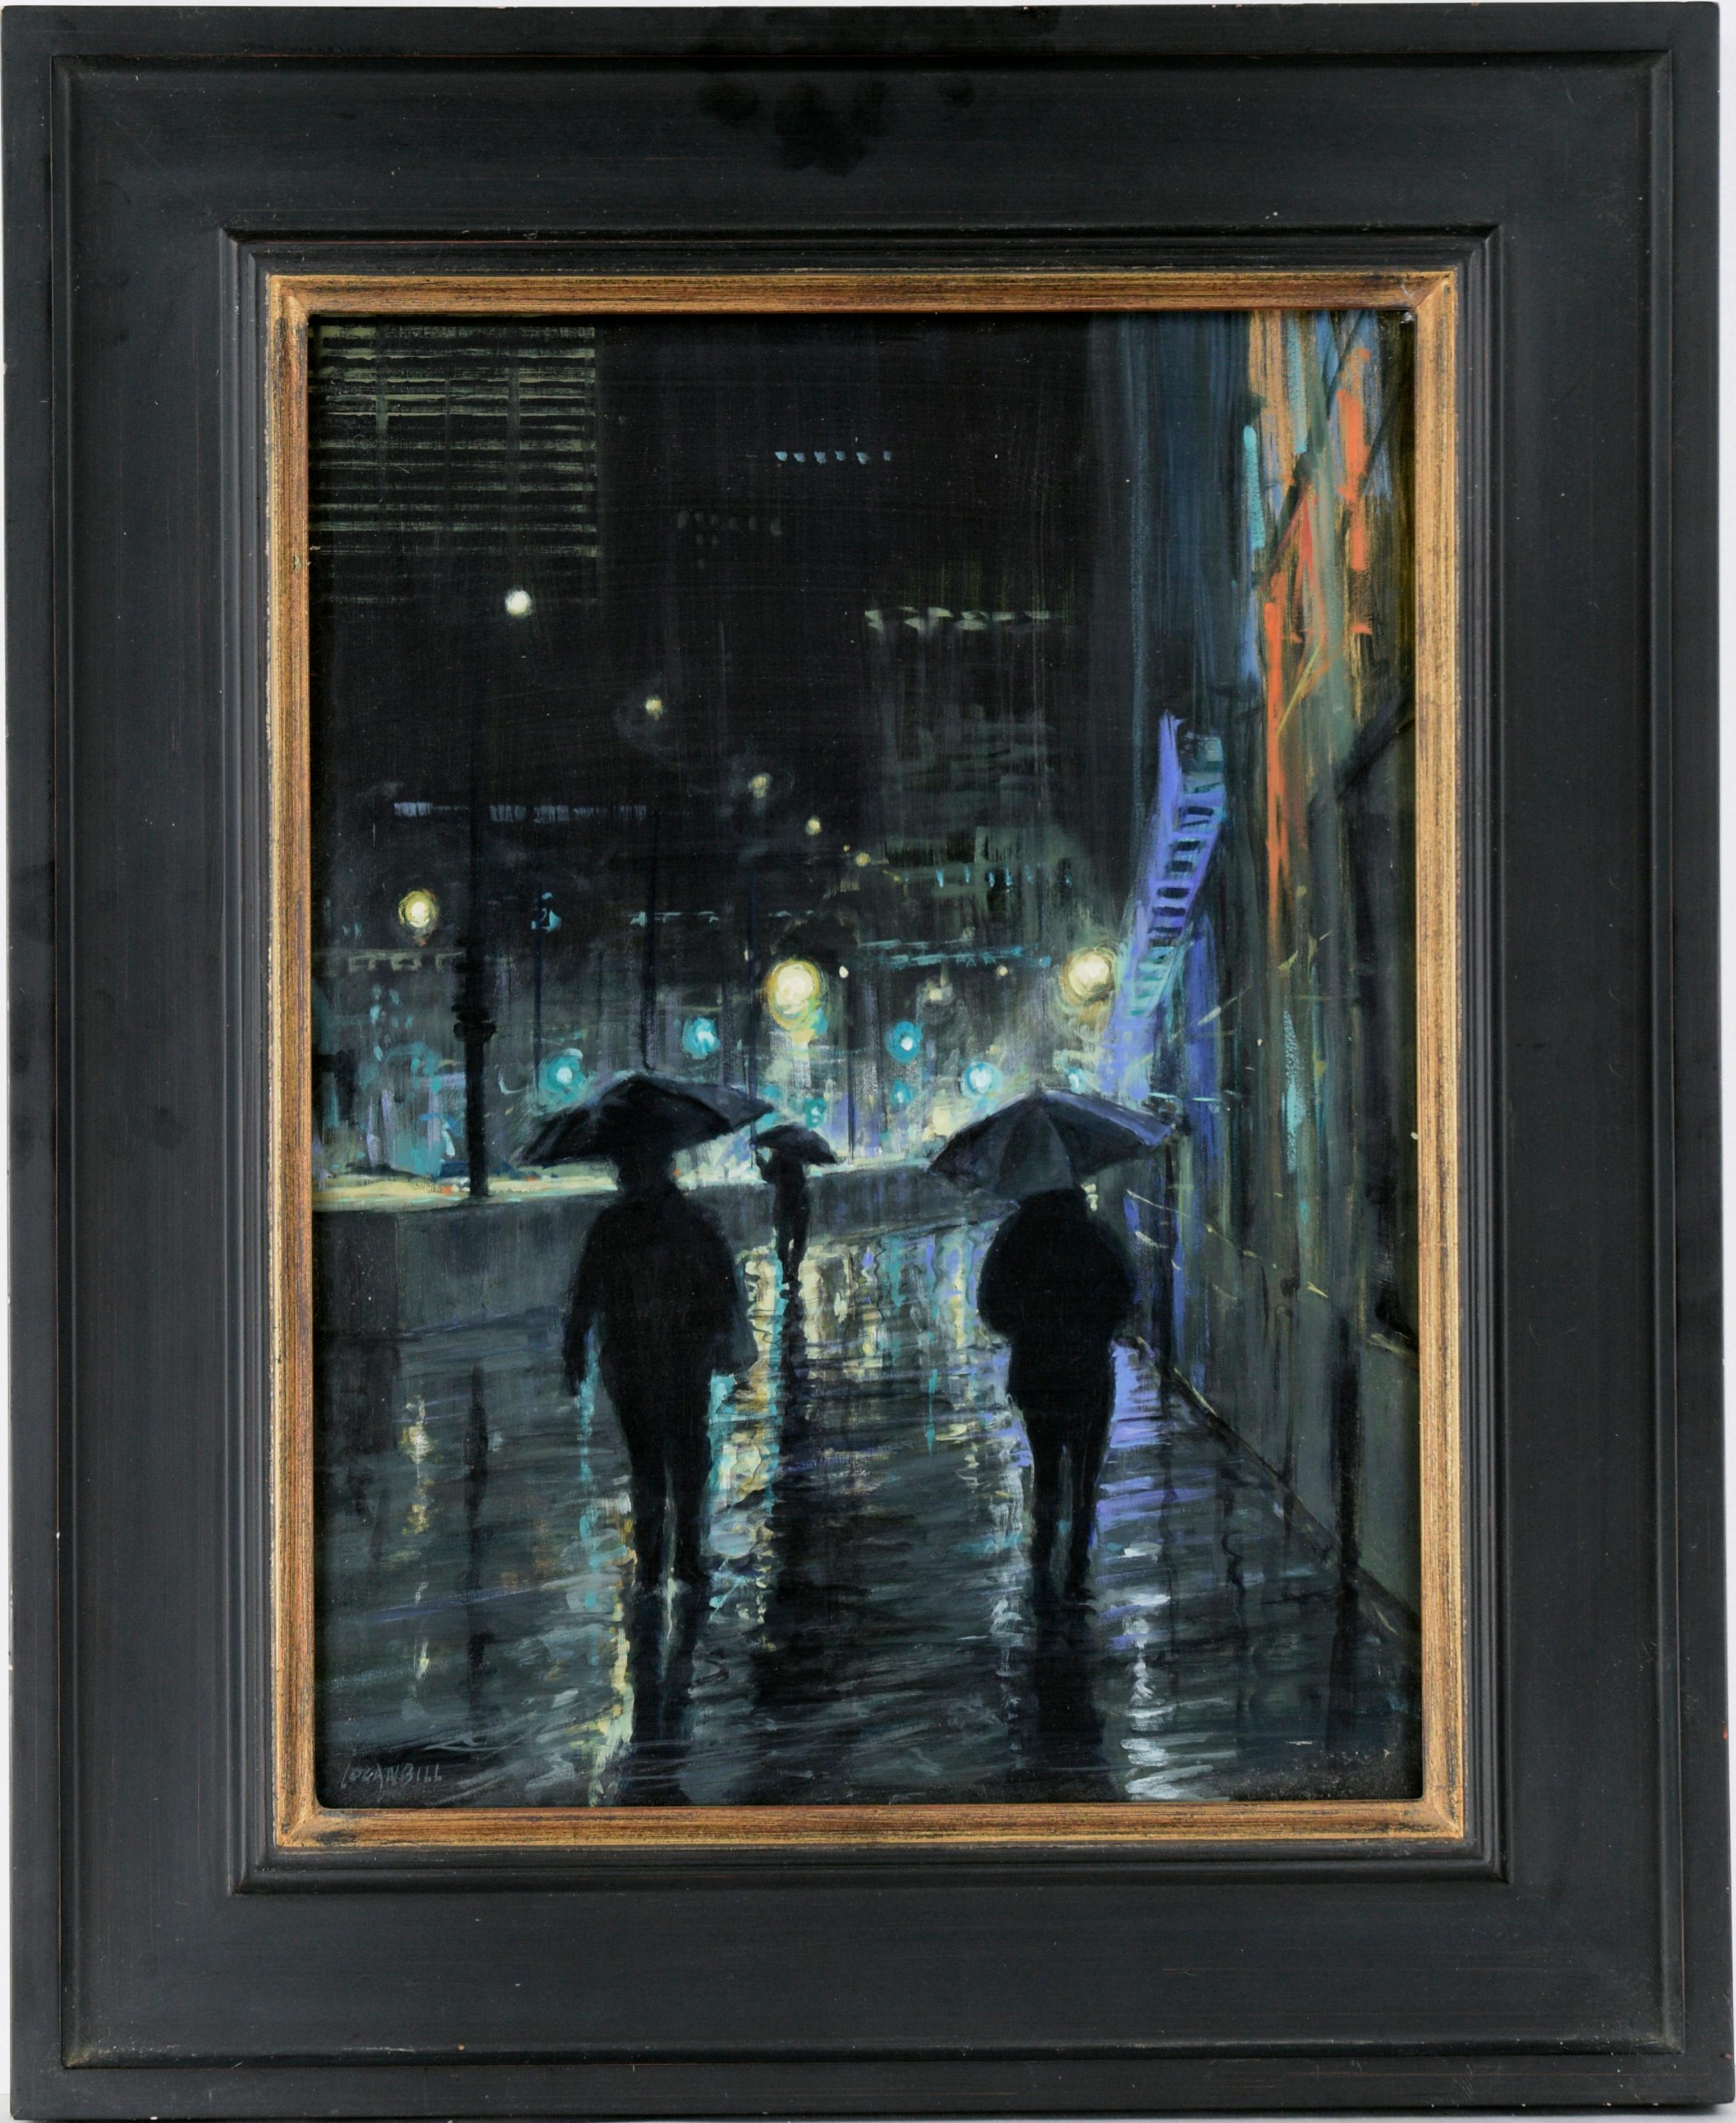 Joseph Loganbill Landscape Painting - "If Our Paths Should Meet" - Nocturnal Street Scene in Oil on Masonite